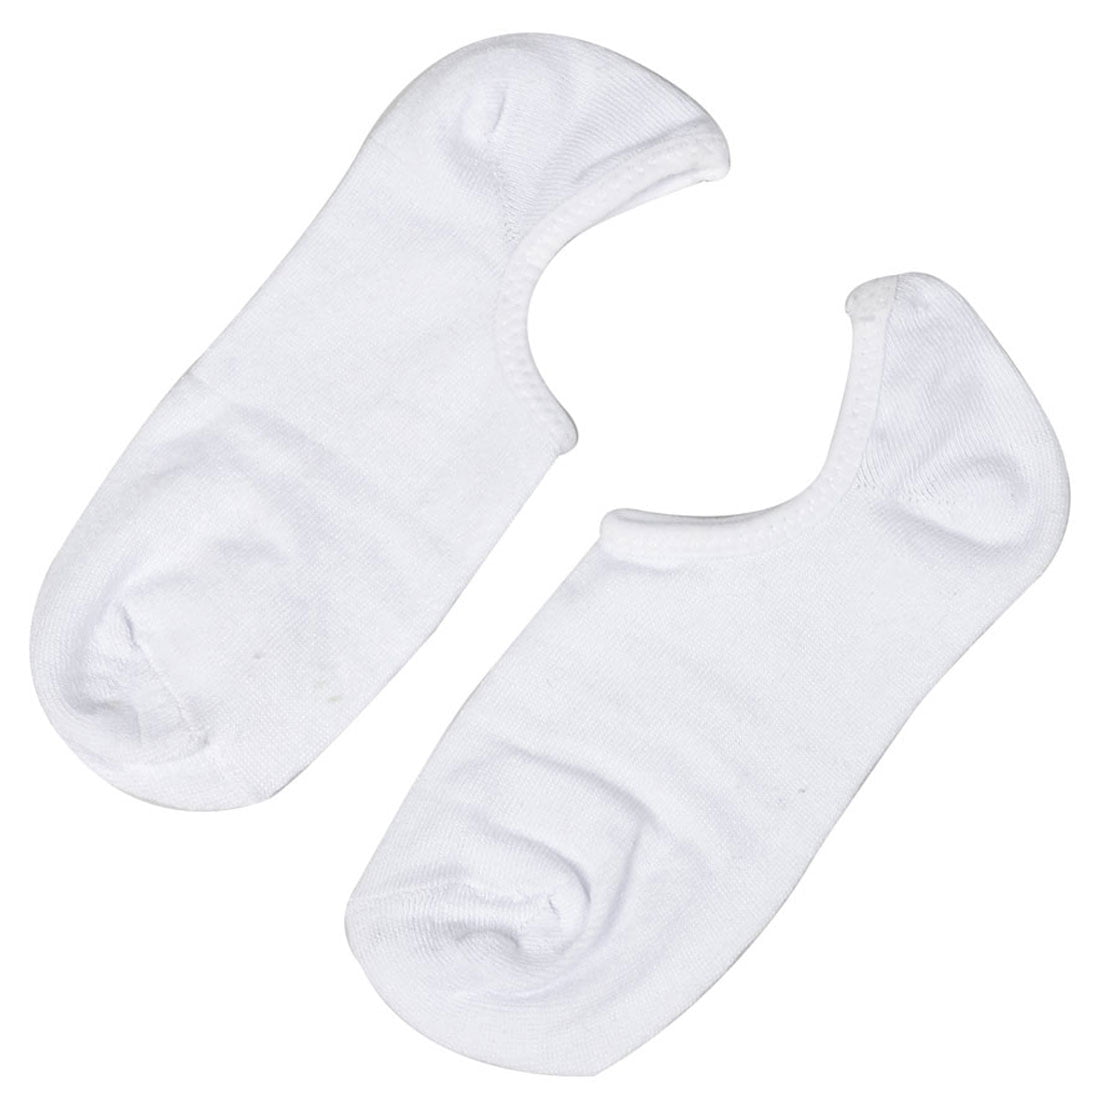 Women White Stretchy Low Cut No Show Footie Boat Socks 2 Pairs ...